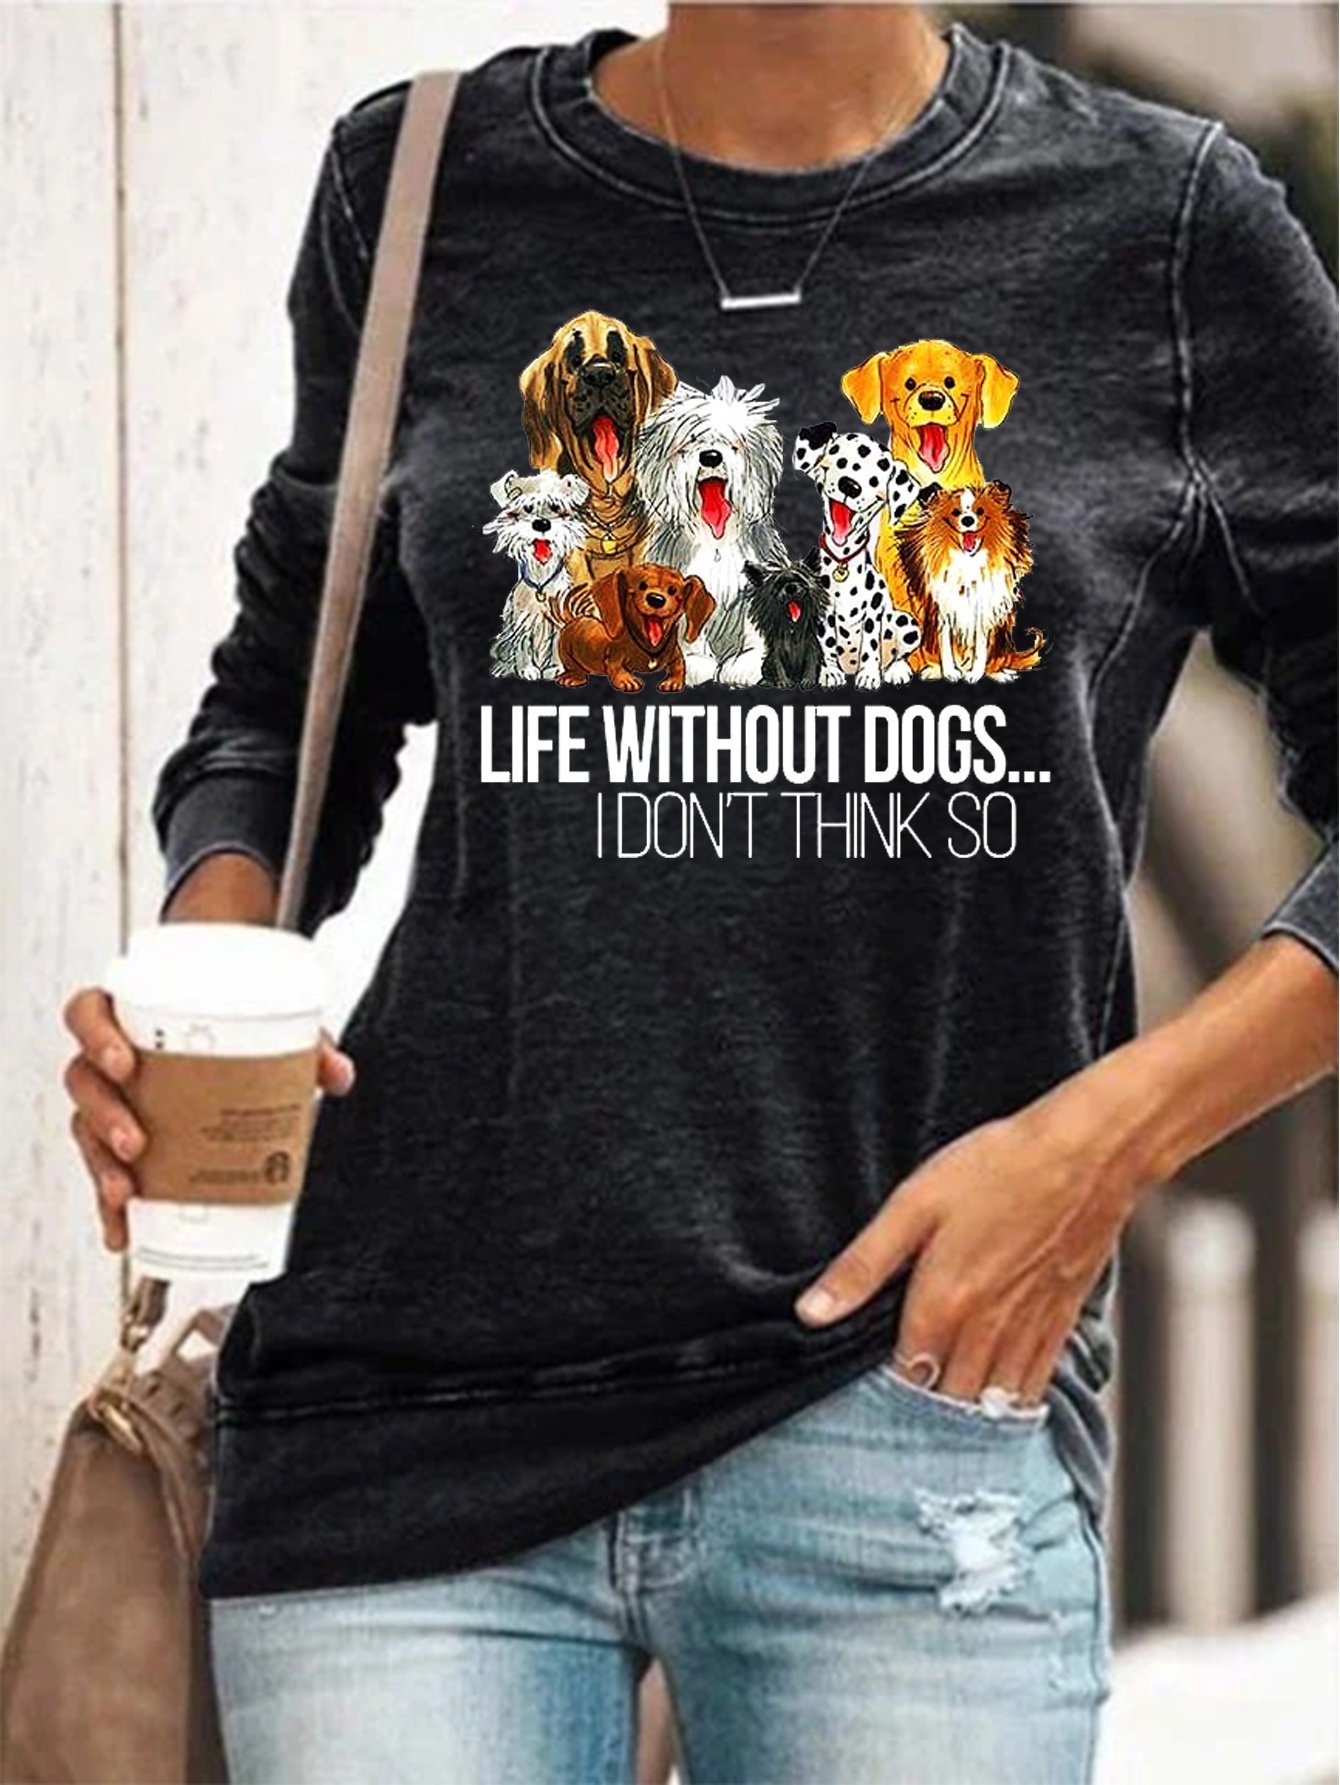 Life Without Dogs Don't Think So Cotton-Blend Casual Crew Neck Long Sleeve Sweatshirt